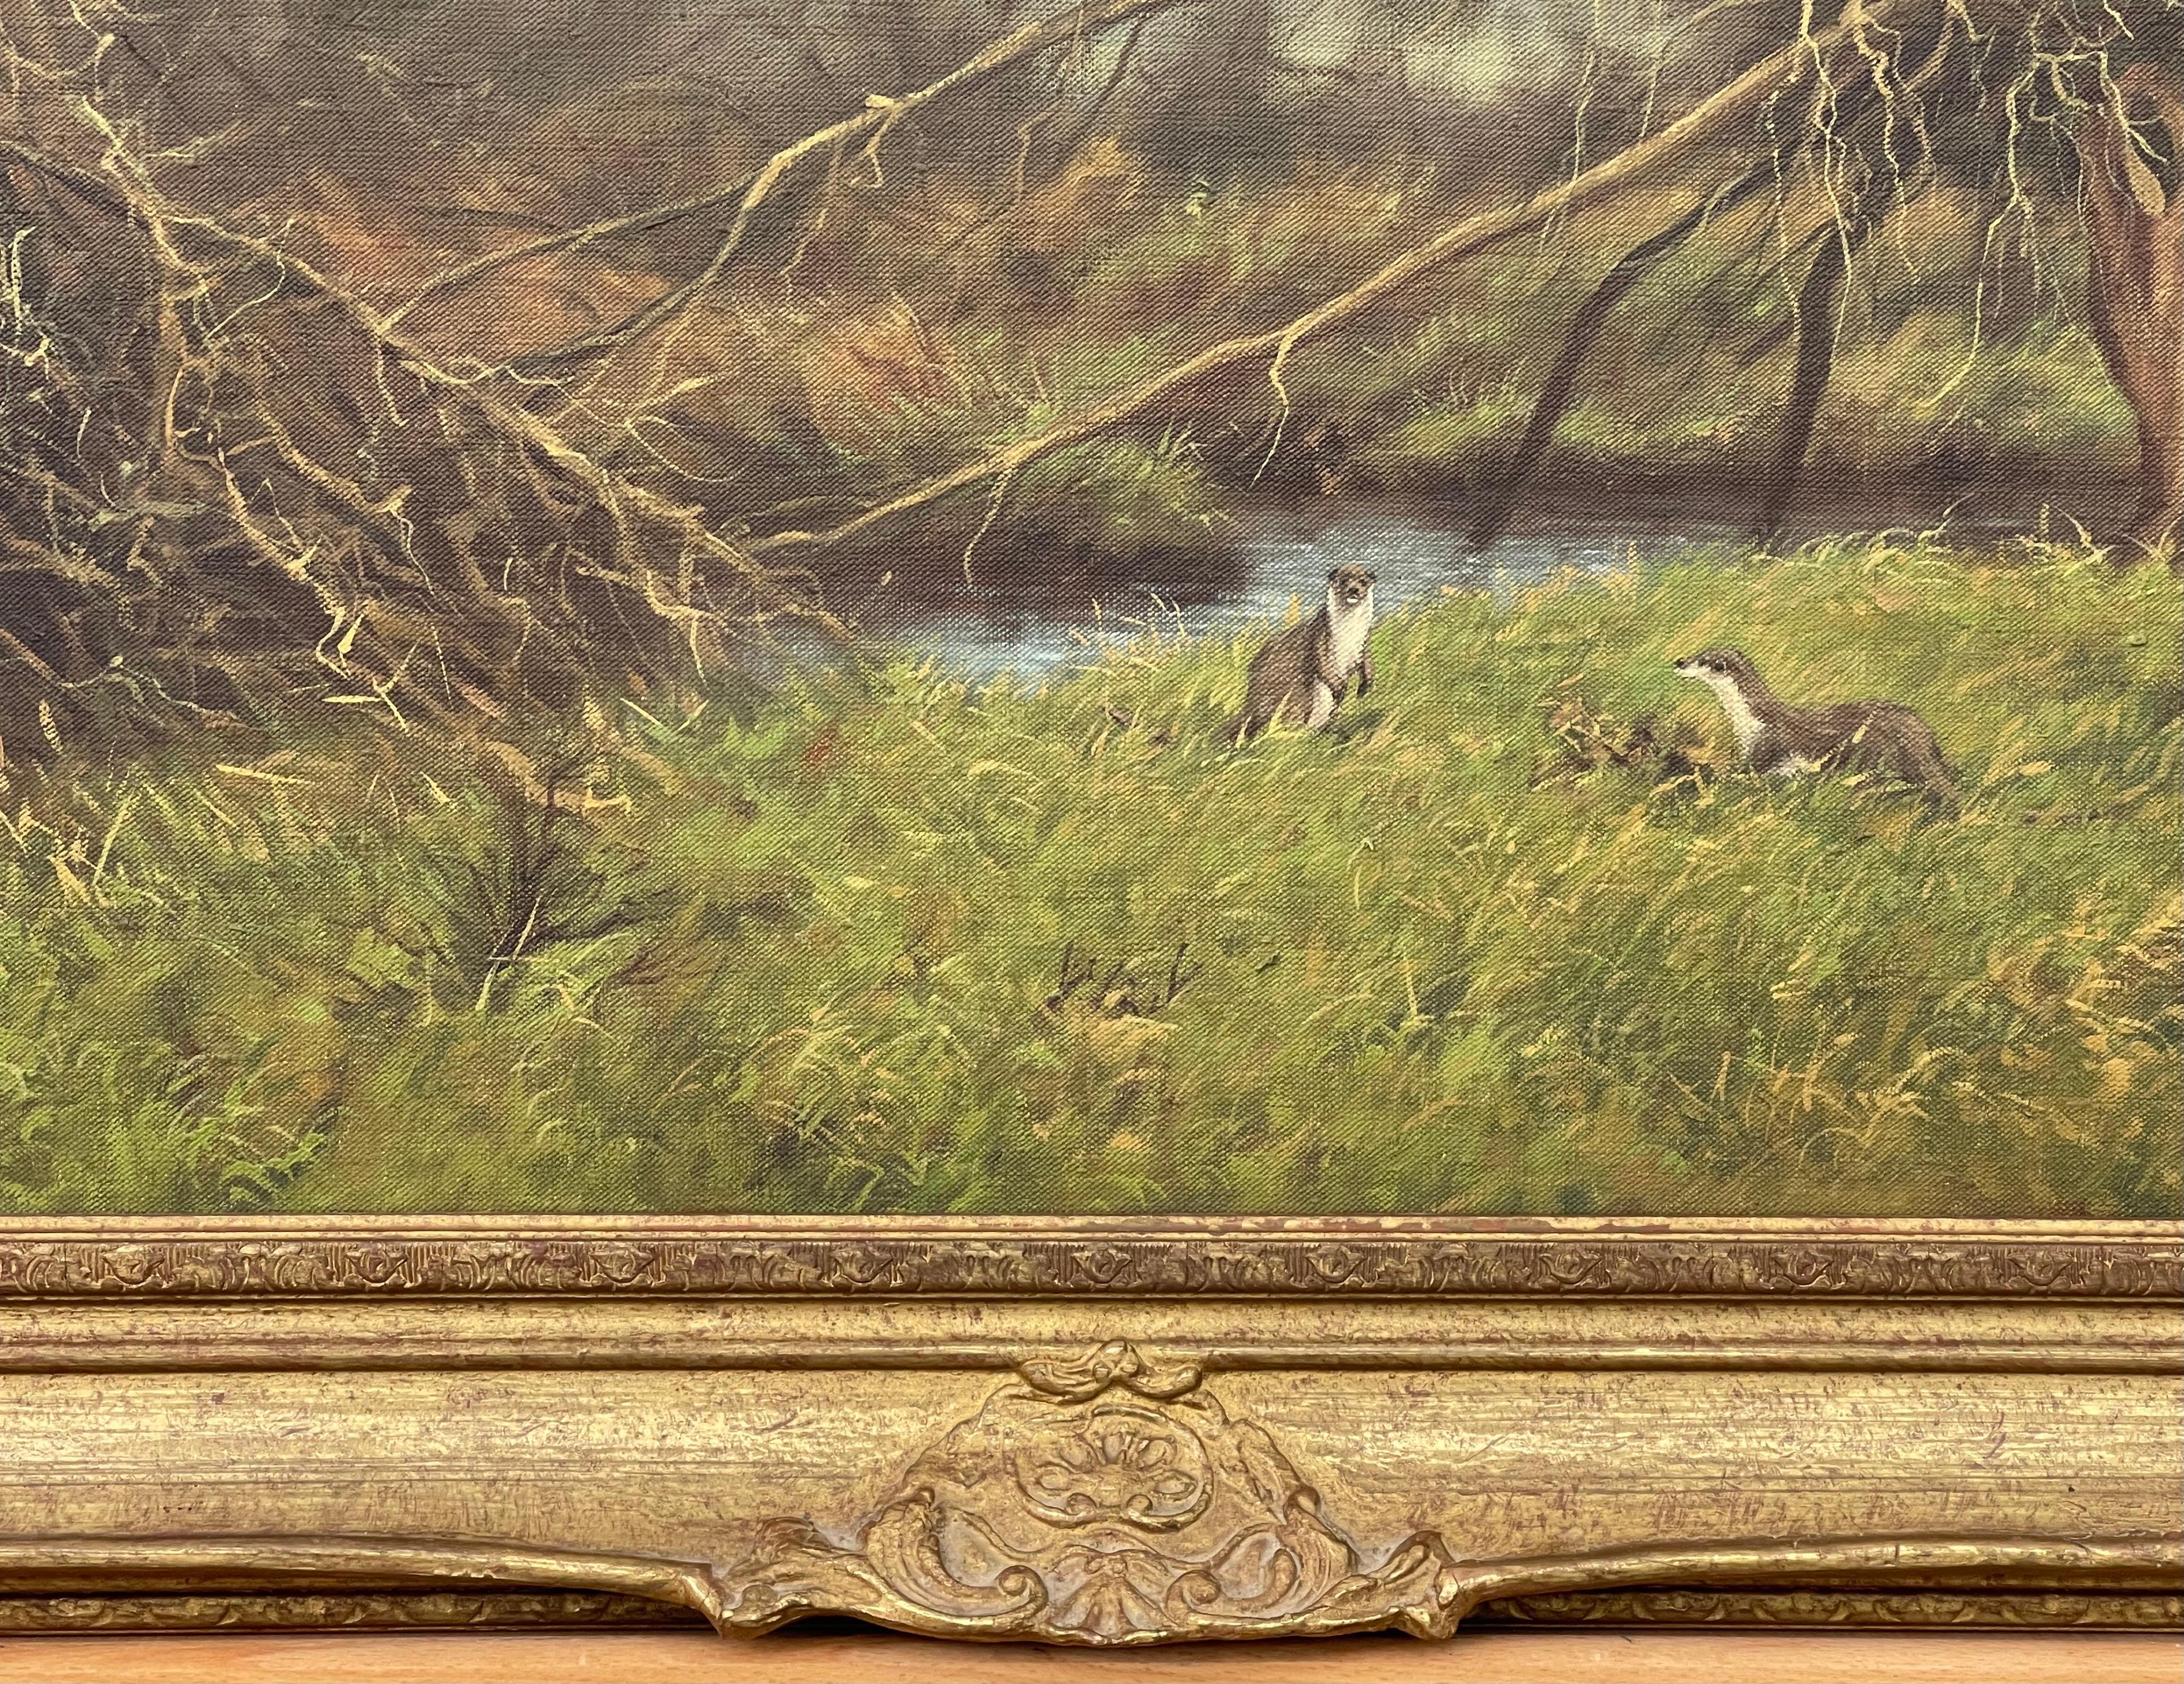 Painting of the English Countryside with River Otters by Modern British Artist For Sale 1